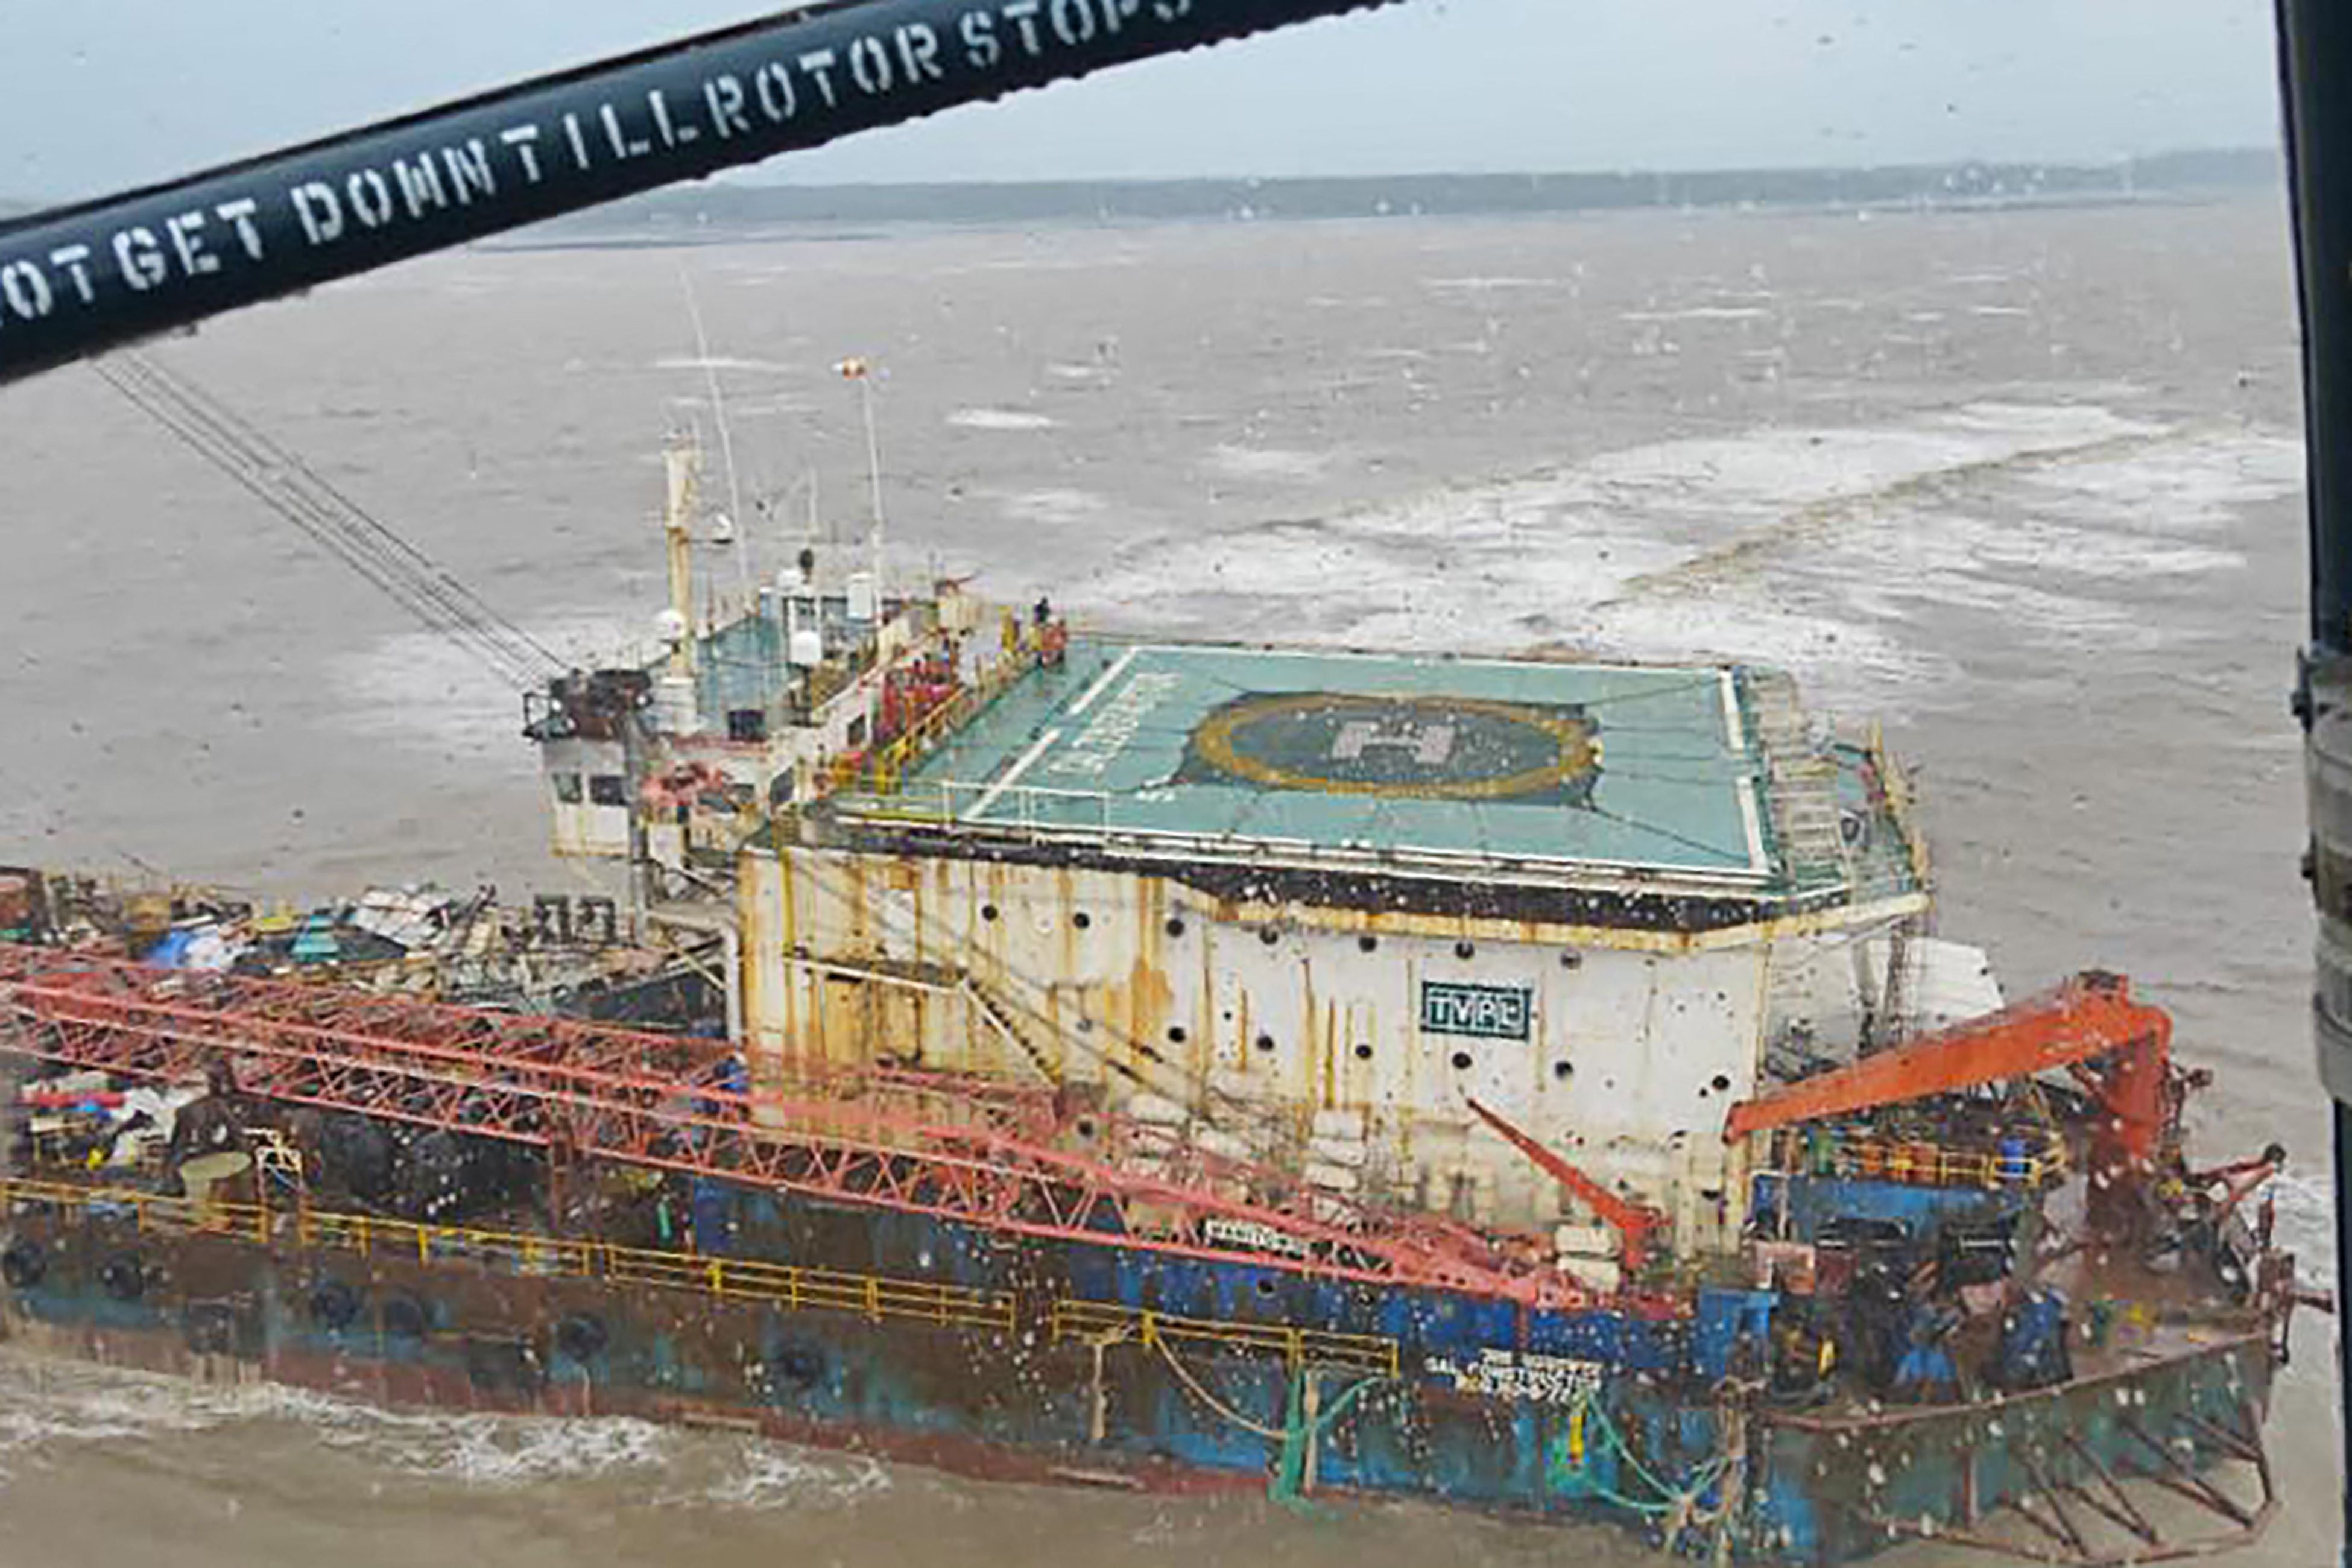 A offshore barge of GAL Constructor after Cyclone Tauktae hit the west coast of India with powerful winds